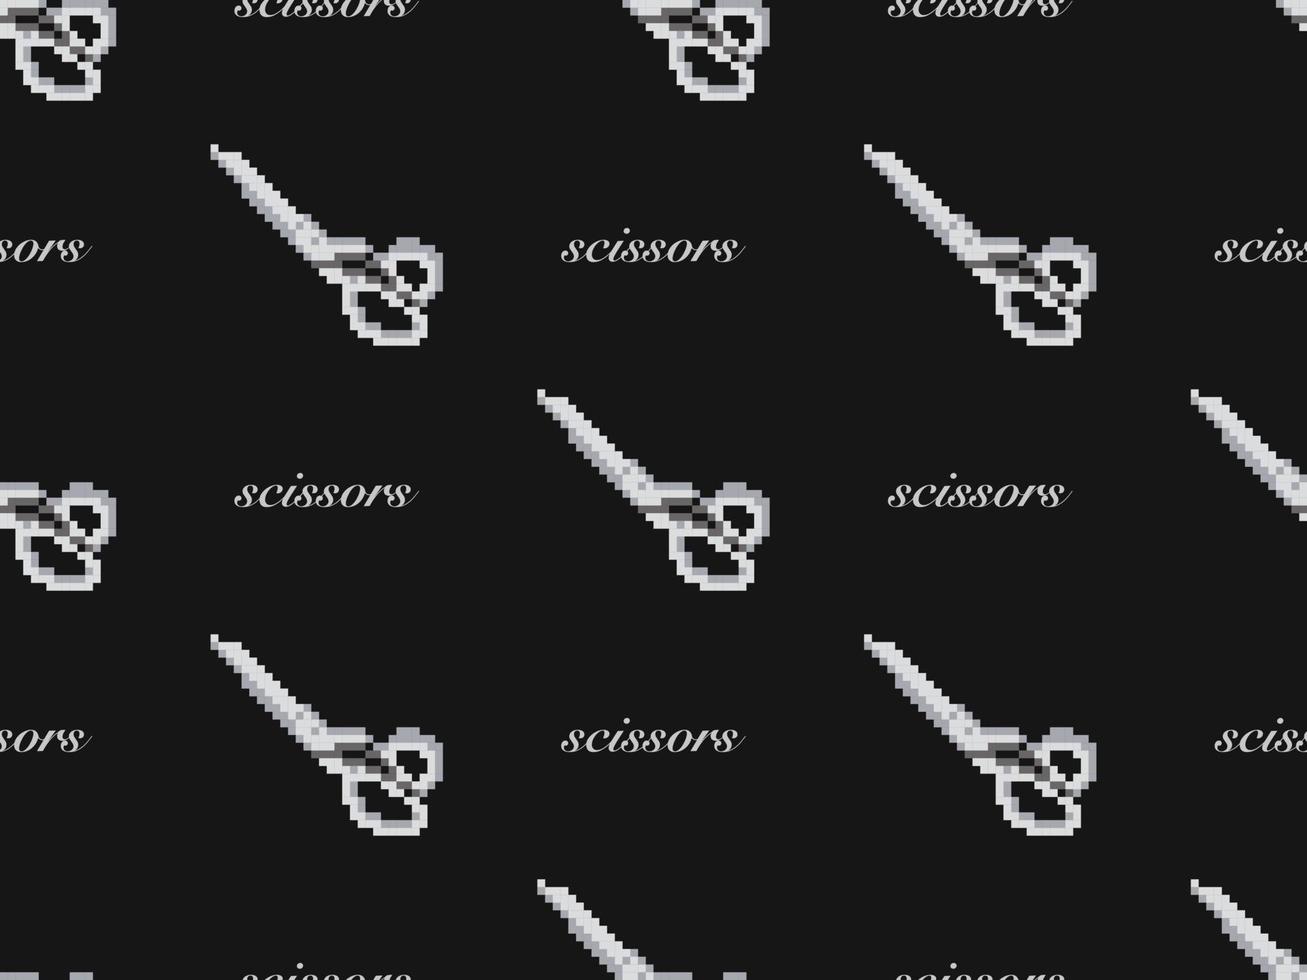 Scissors cartoon character seamless pattern on black background. Pixel style vector